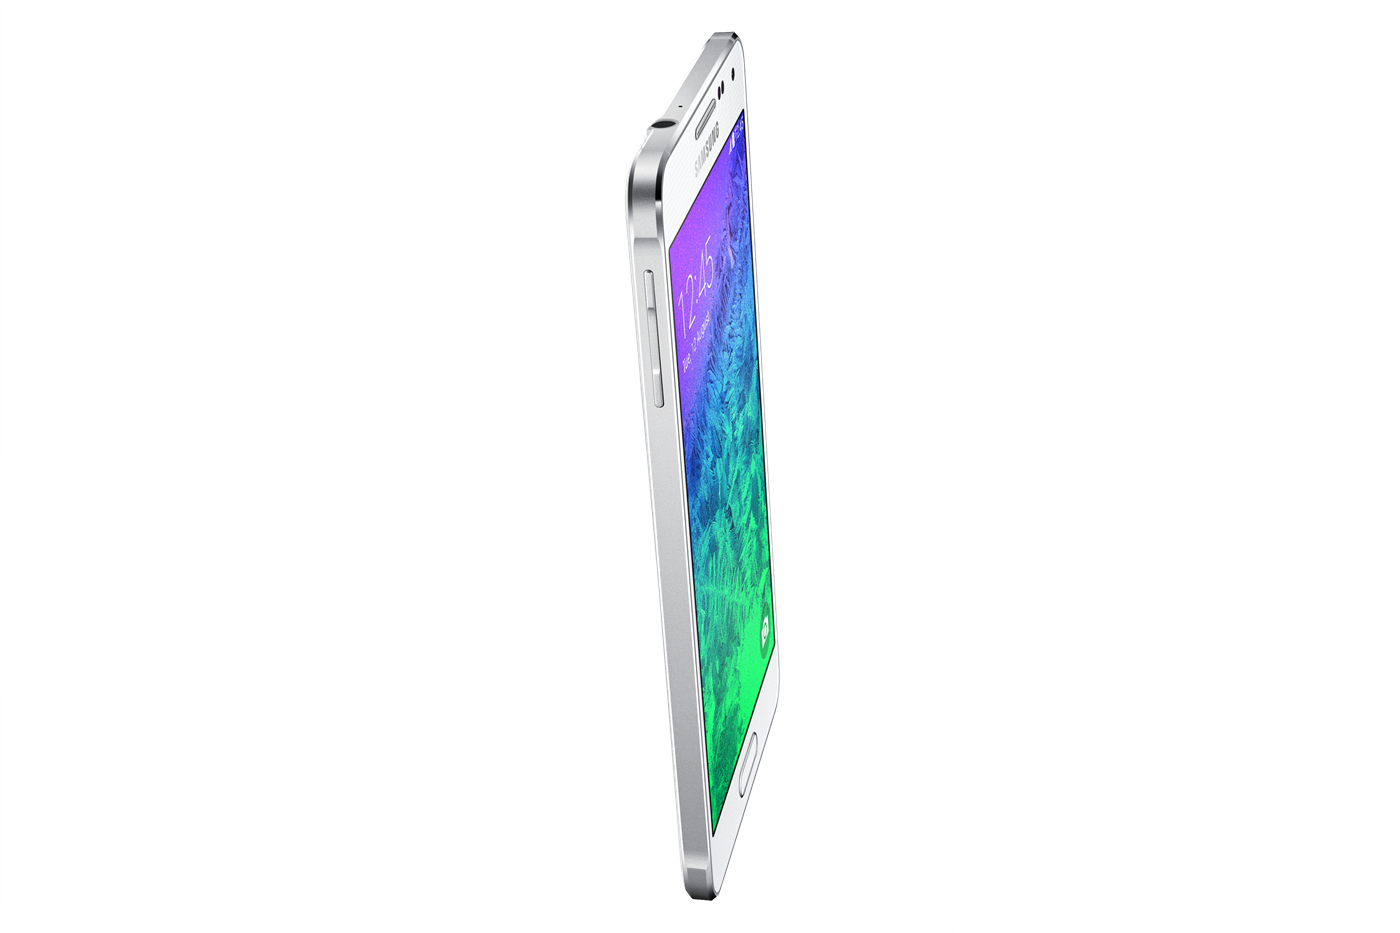 Samsung-Galaxy-Alpha-official-images (12)